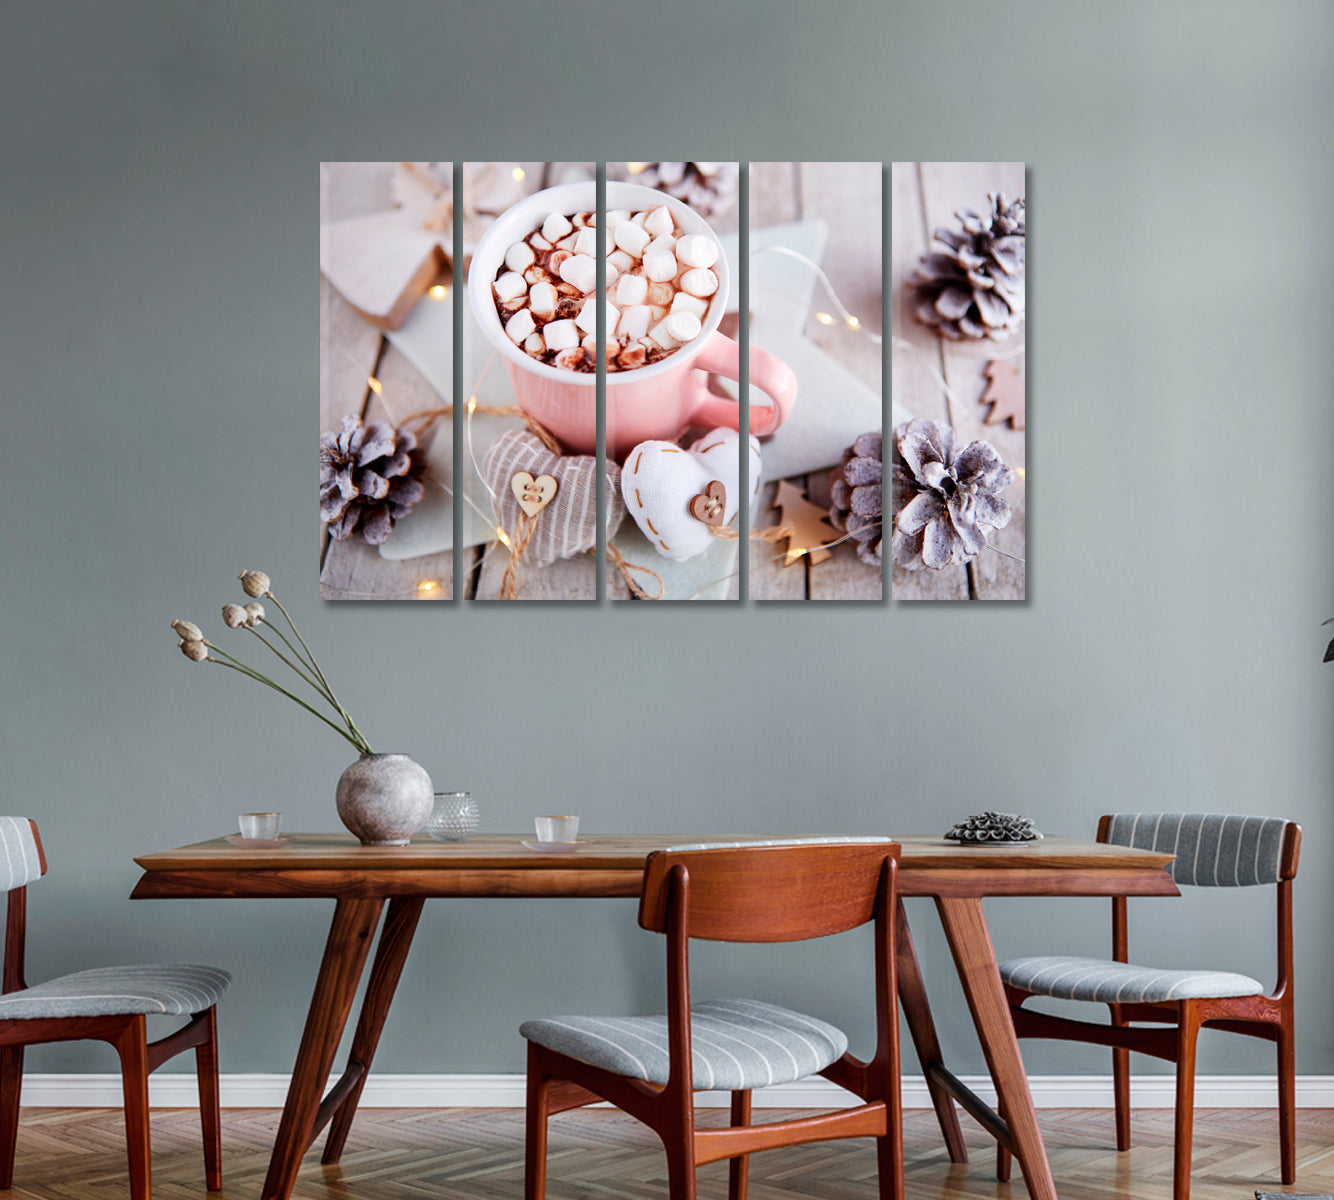 Cup of Chocolate with Marshmallows Canvas Print ArtLexy   